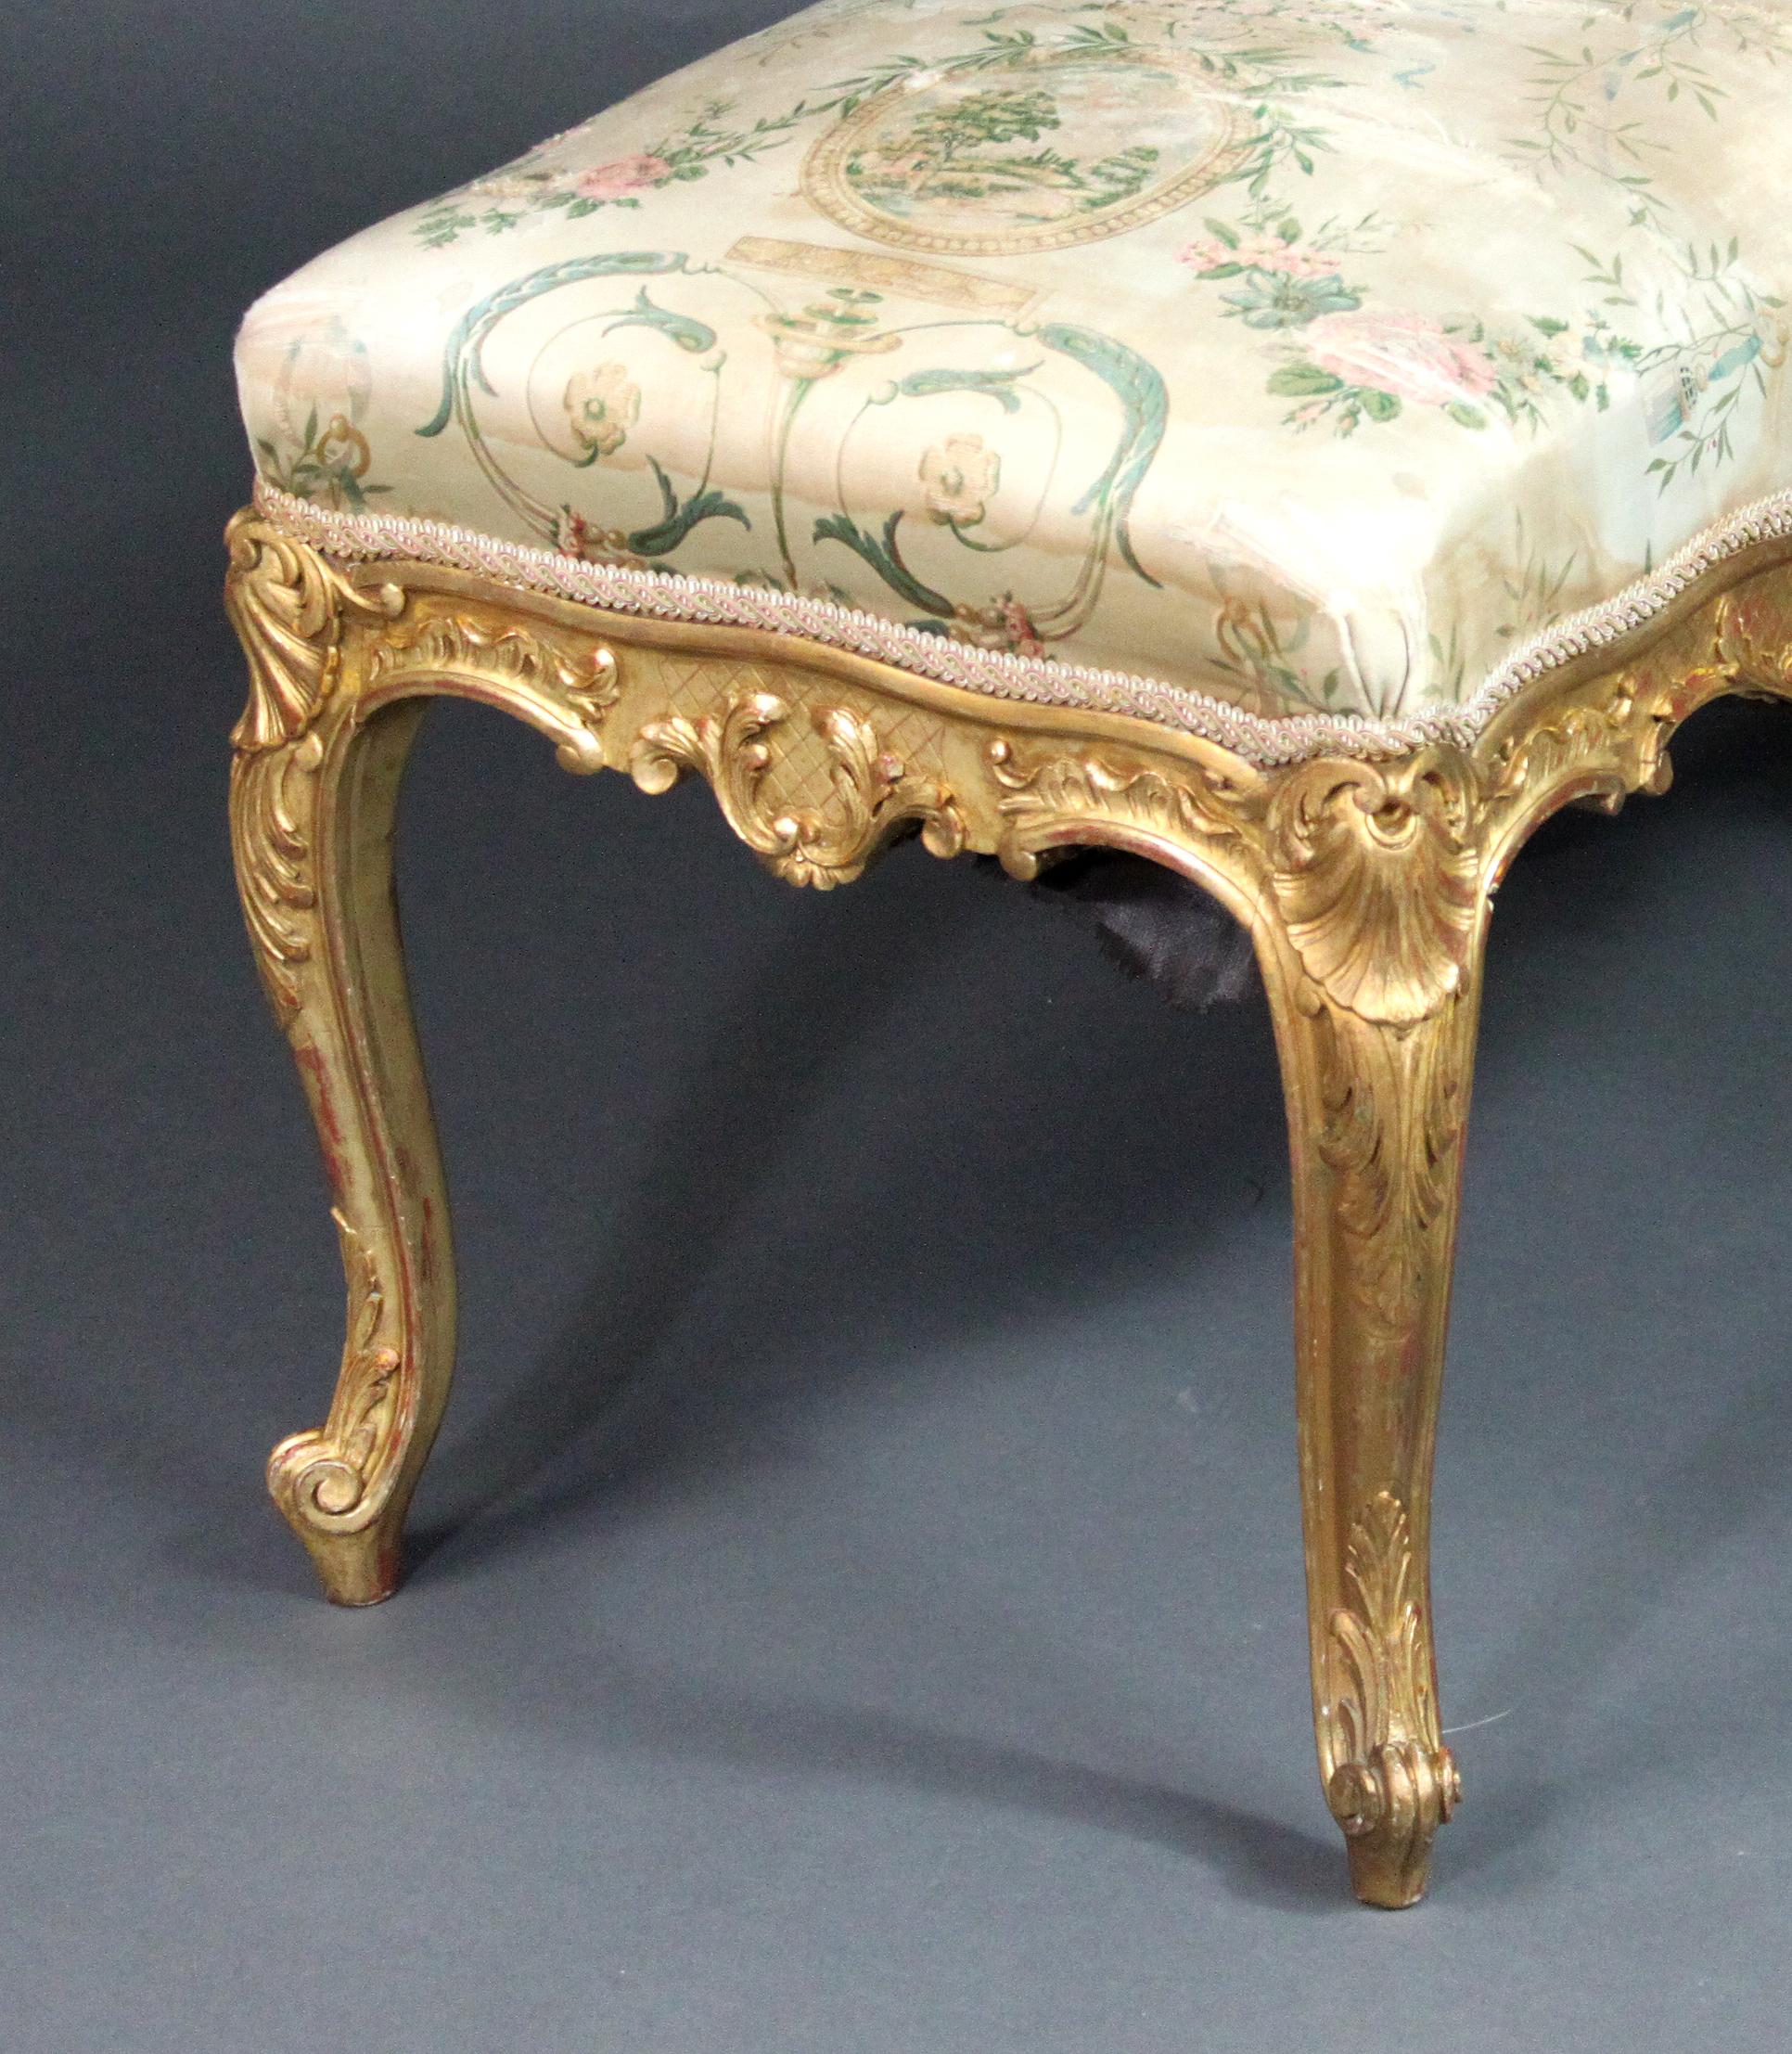 A fine Louis XVI style giltwood cabriole leg stool with with carved detail: shells, acanthus leaves and foliage. Most of the original gilding intact with the attractive red bole showing through in places. The gilding on the feet is slightly worn and